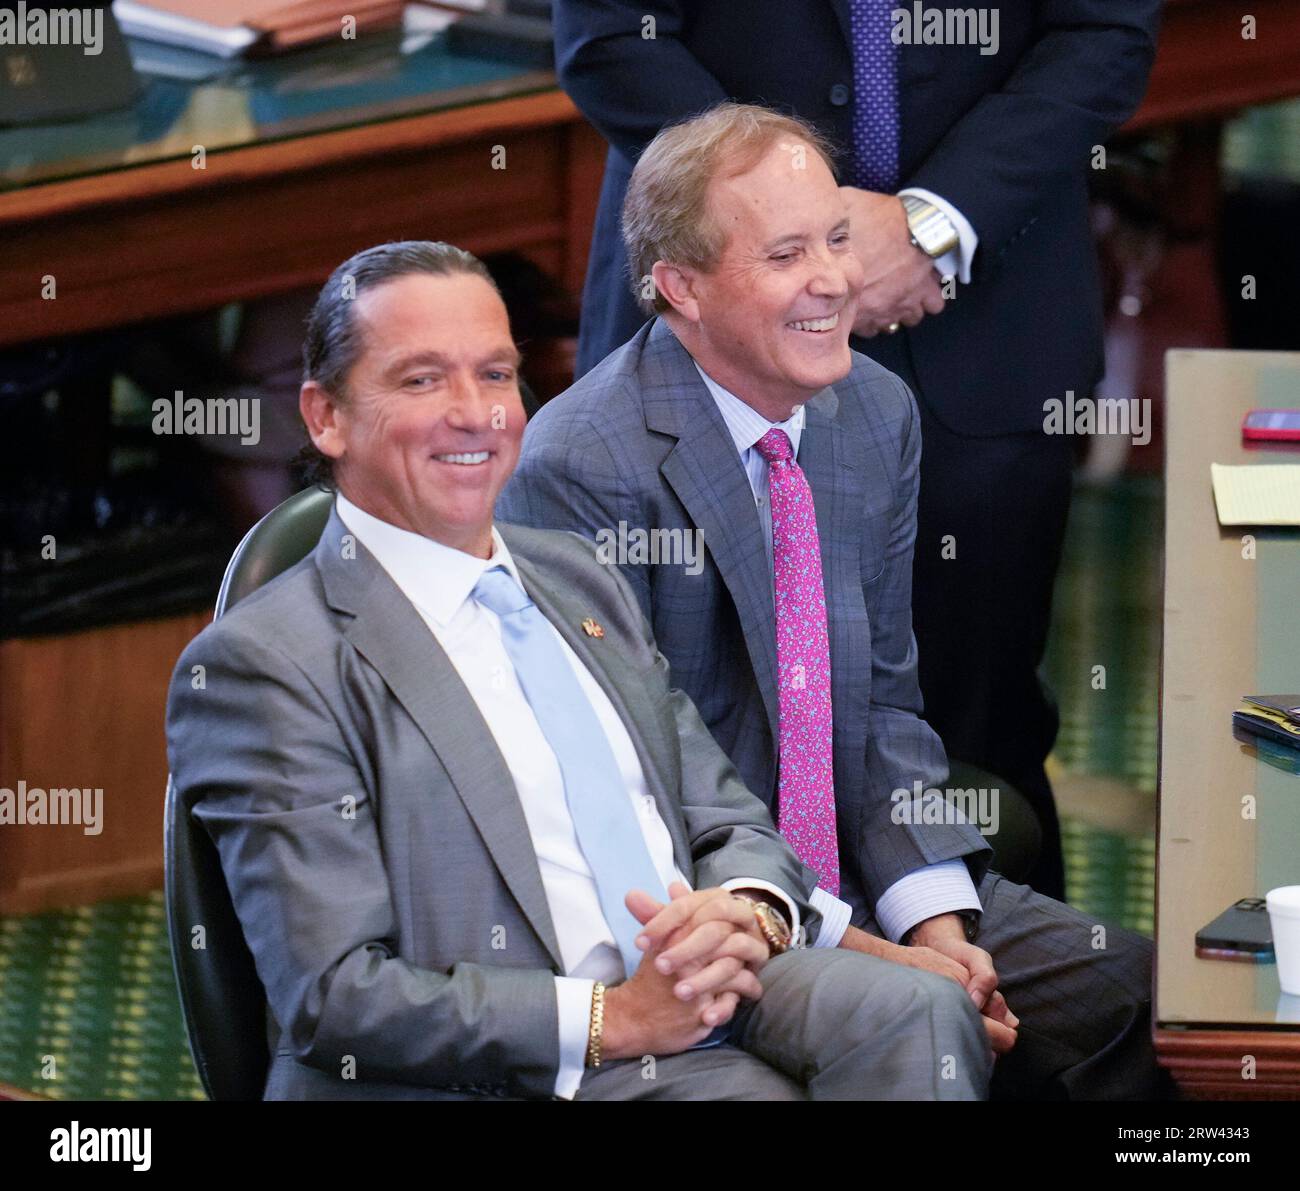 Austin, Texas, USA. 16th Sep 2023. Texas Attorney General KEN PAXTON smiles while he sits sits with his lawyers TONY BUZBEE and MITCH LITTLE before testimony on September 15, 2023. Paxton will be reinstated as Texas Attorney General after surviving an impeachment vote on 16 counts in the Texas Senate on September 16, 2023. Paxton did not attend the final day of the trial. Credit: Bob Daemmrich/Alamy Live News Stock Photo